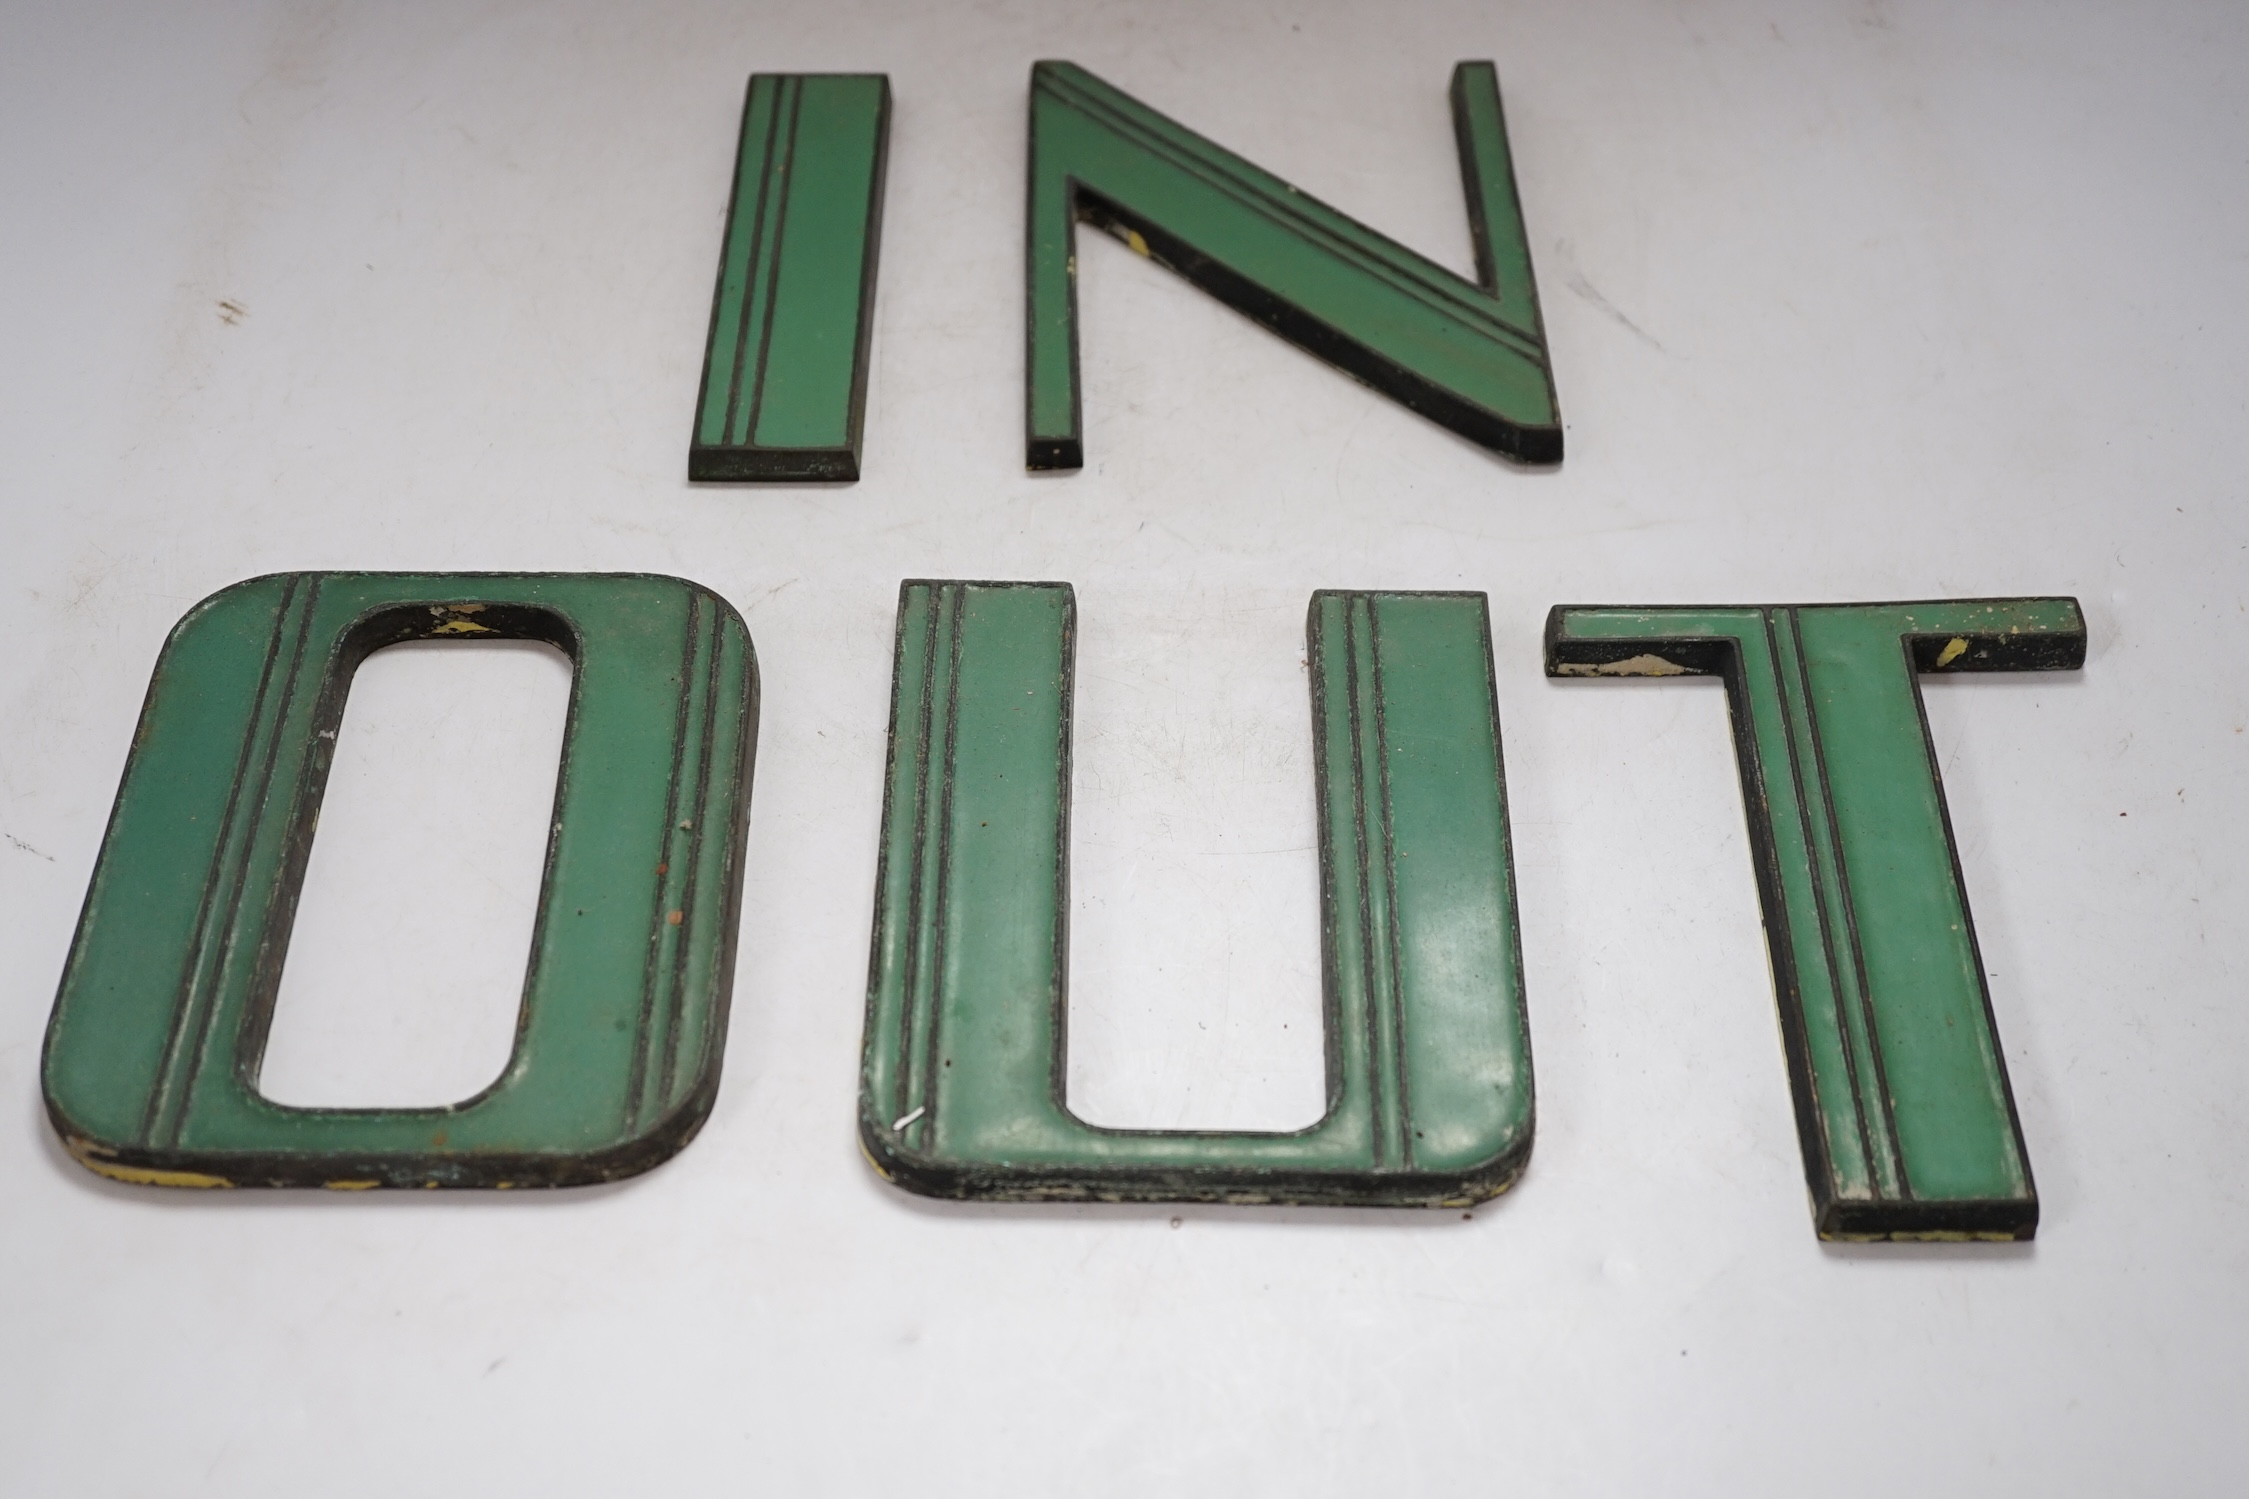 Art Deco green enamelled cast metal letters to spell ‘IN’ and ‘OUT’, 15cm tall. Condition - fair to good